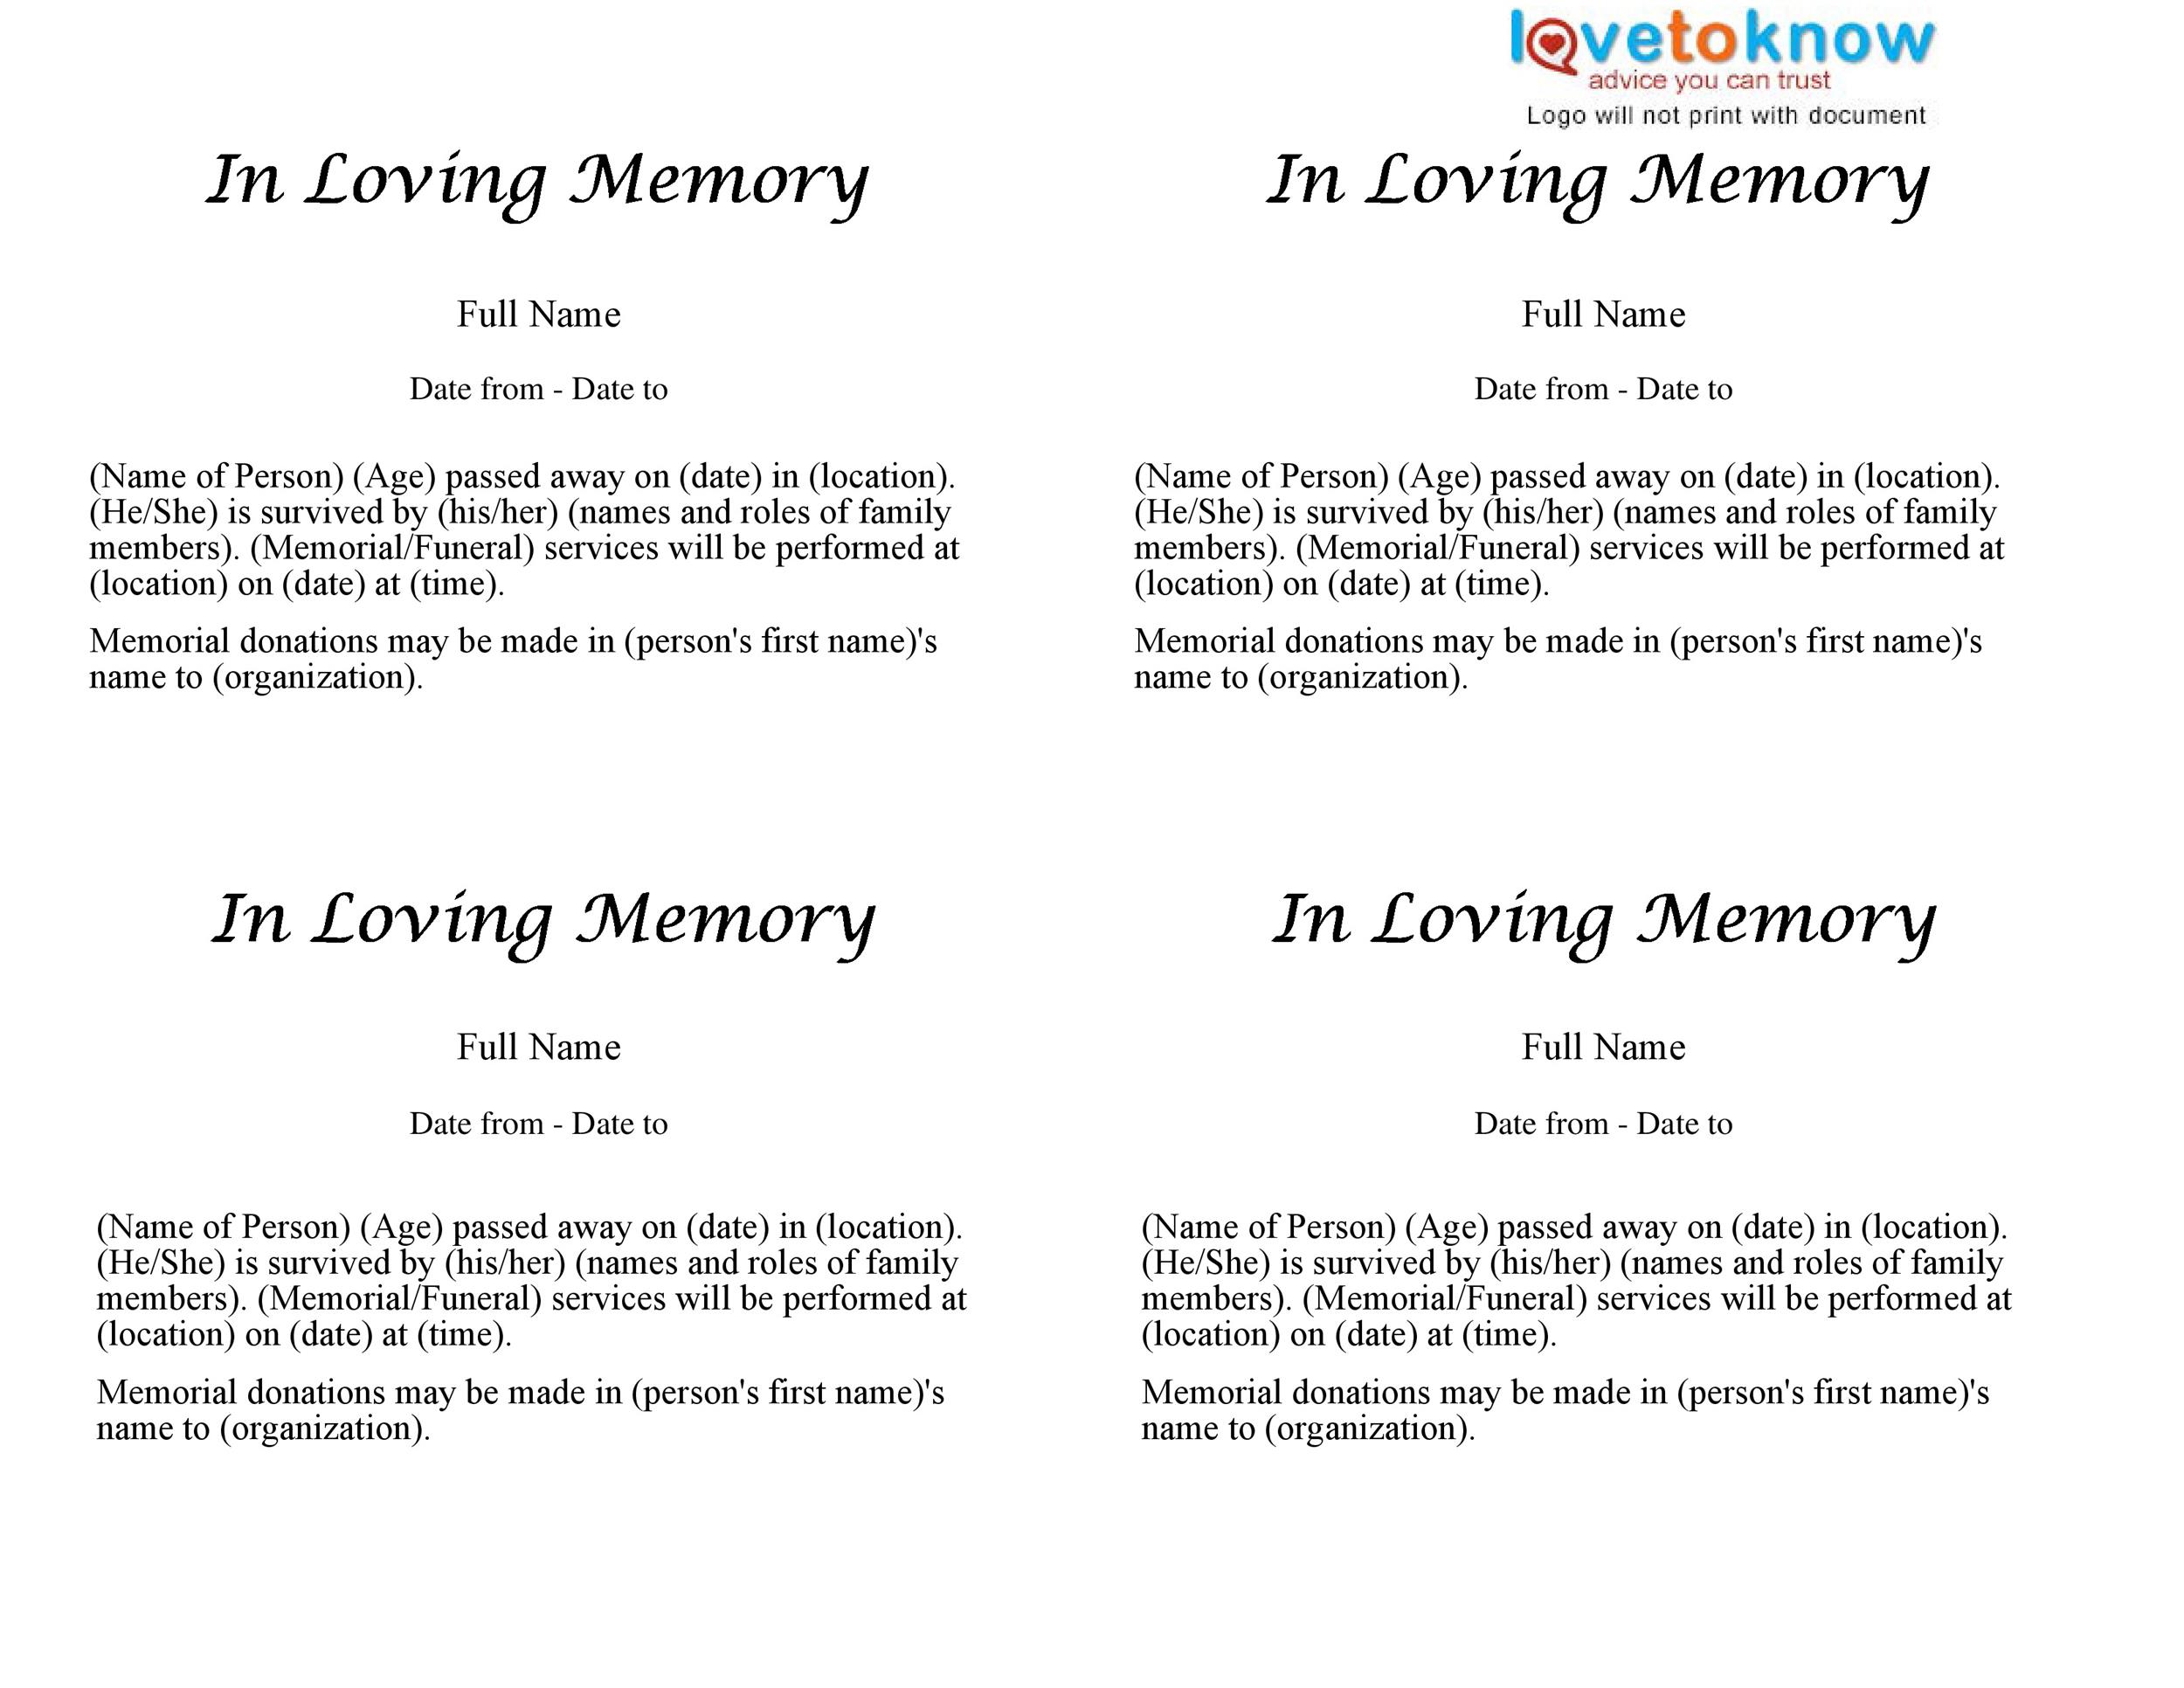 25+ Obituary Templates and Samples ᐅ TemplateLab